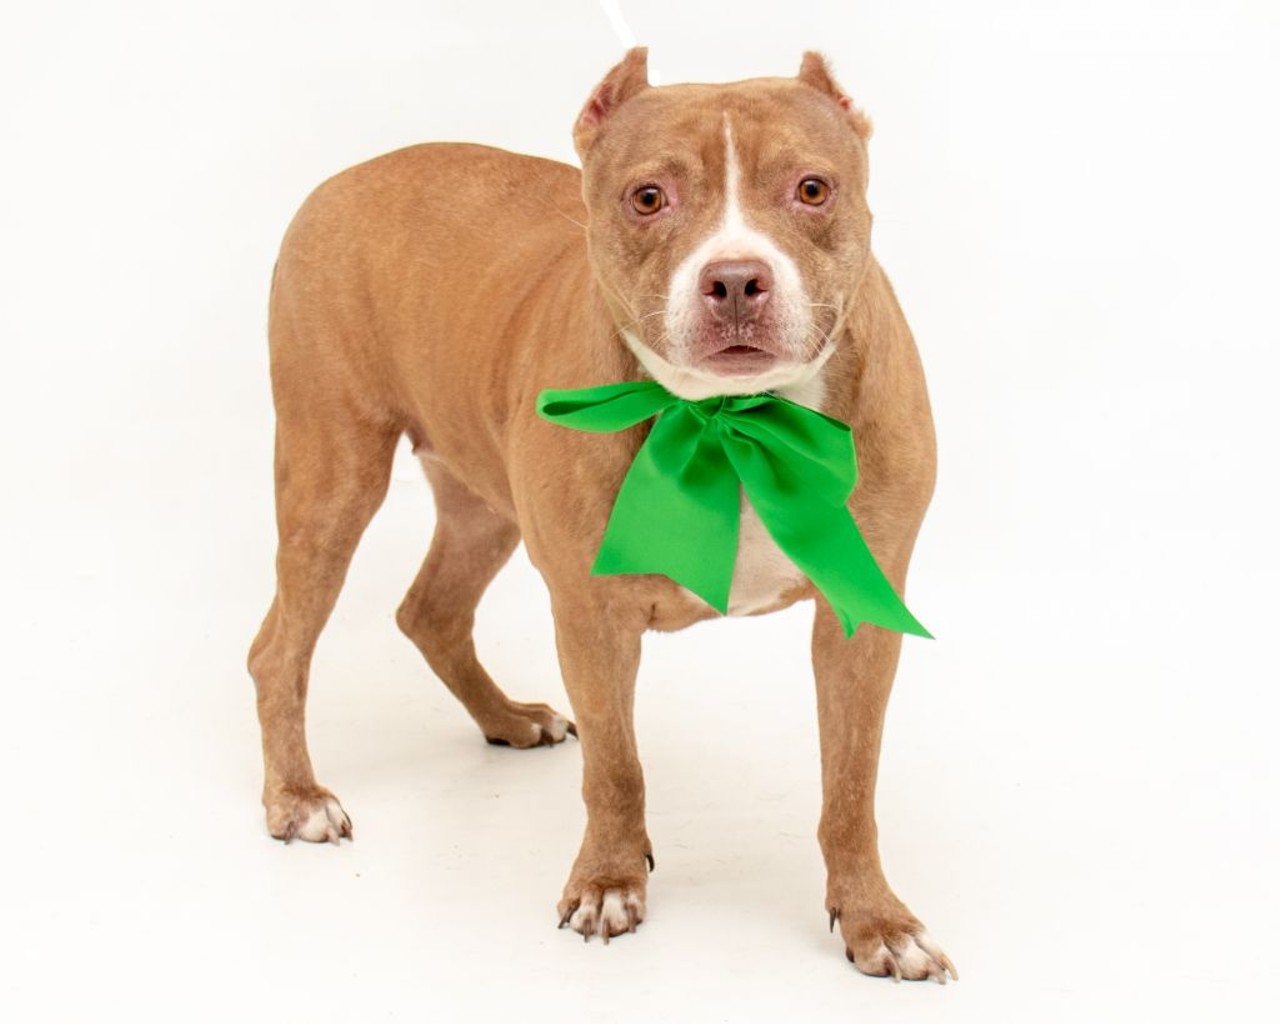 18 adoptable pups looking for a new home in Orange County this Christmas